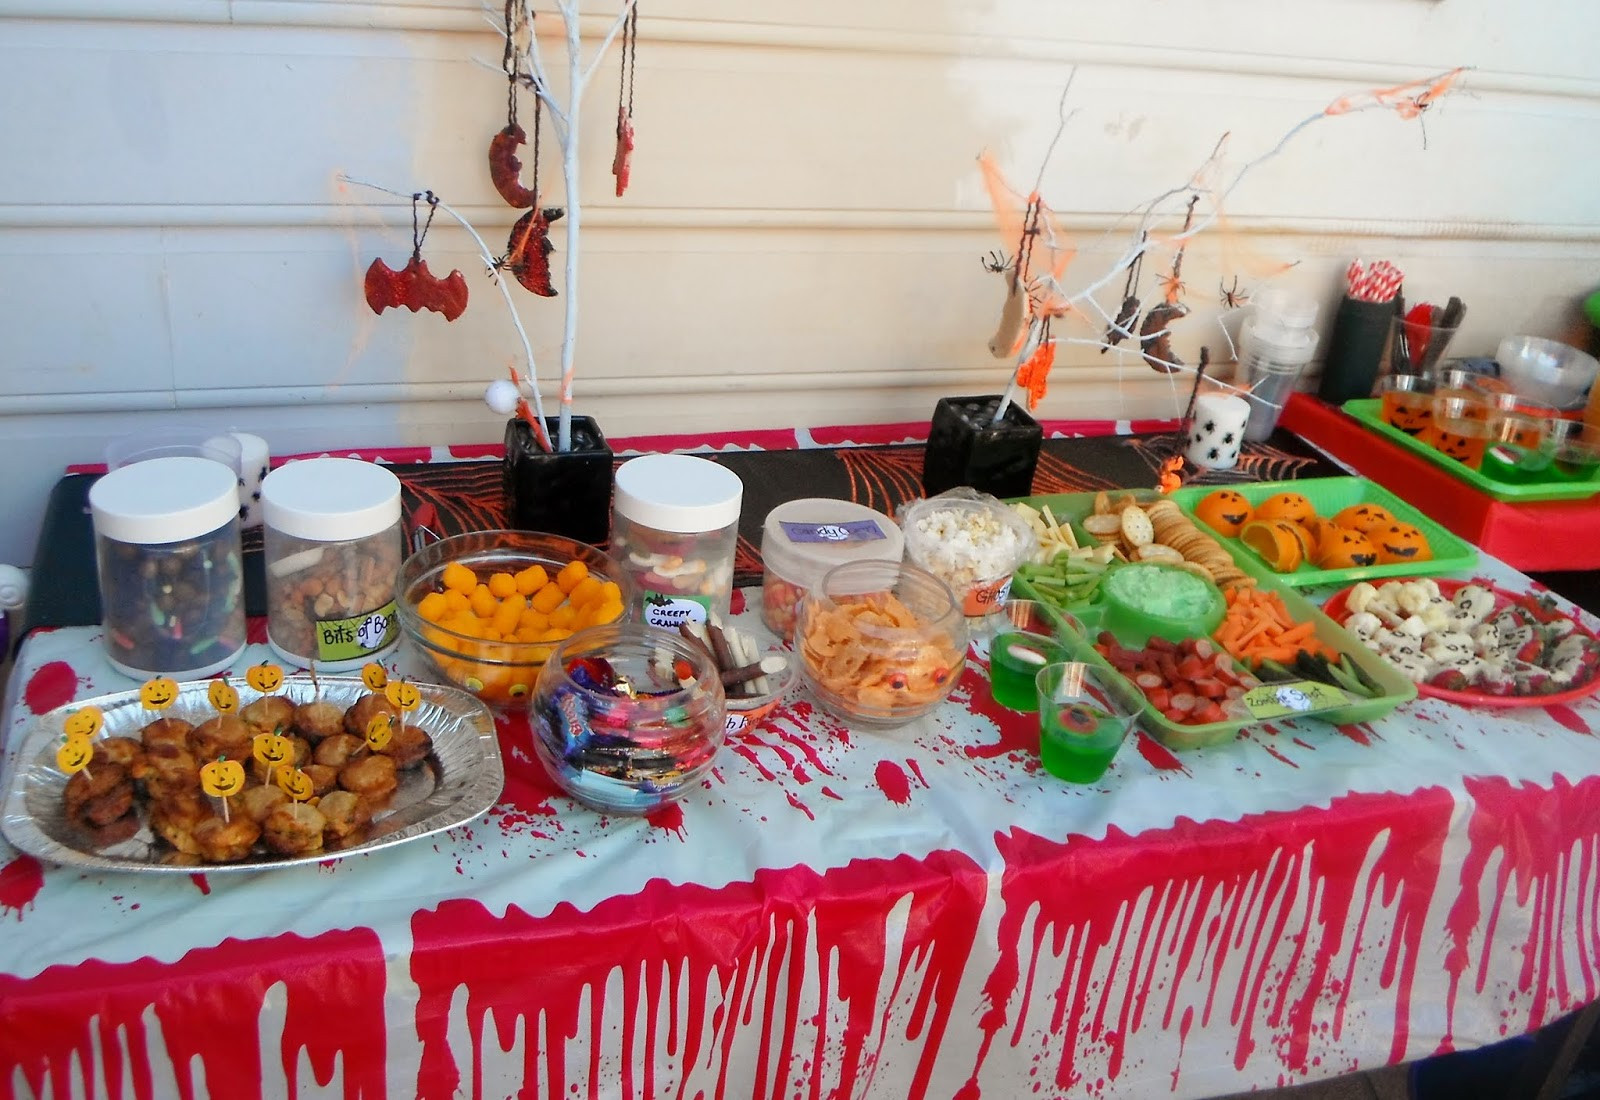 Halloween Party Menu Ideas
 Adventures at home with Mum Halloween Party Food